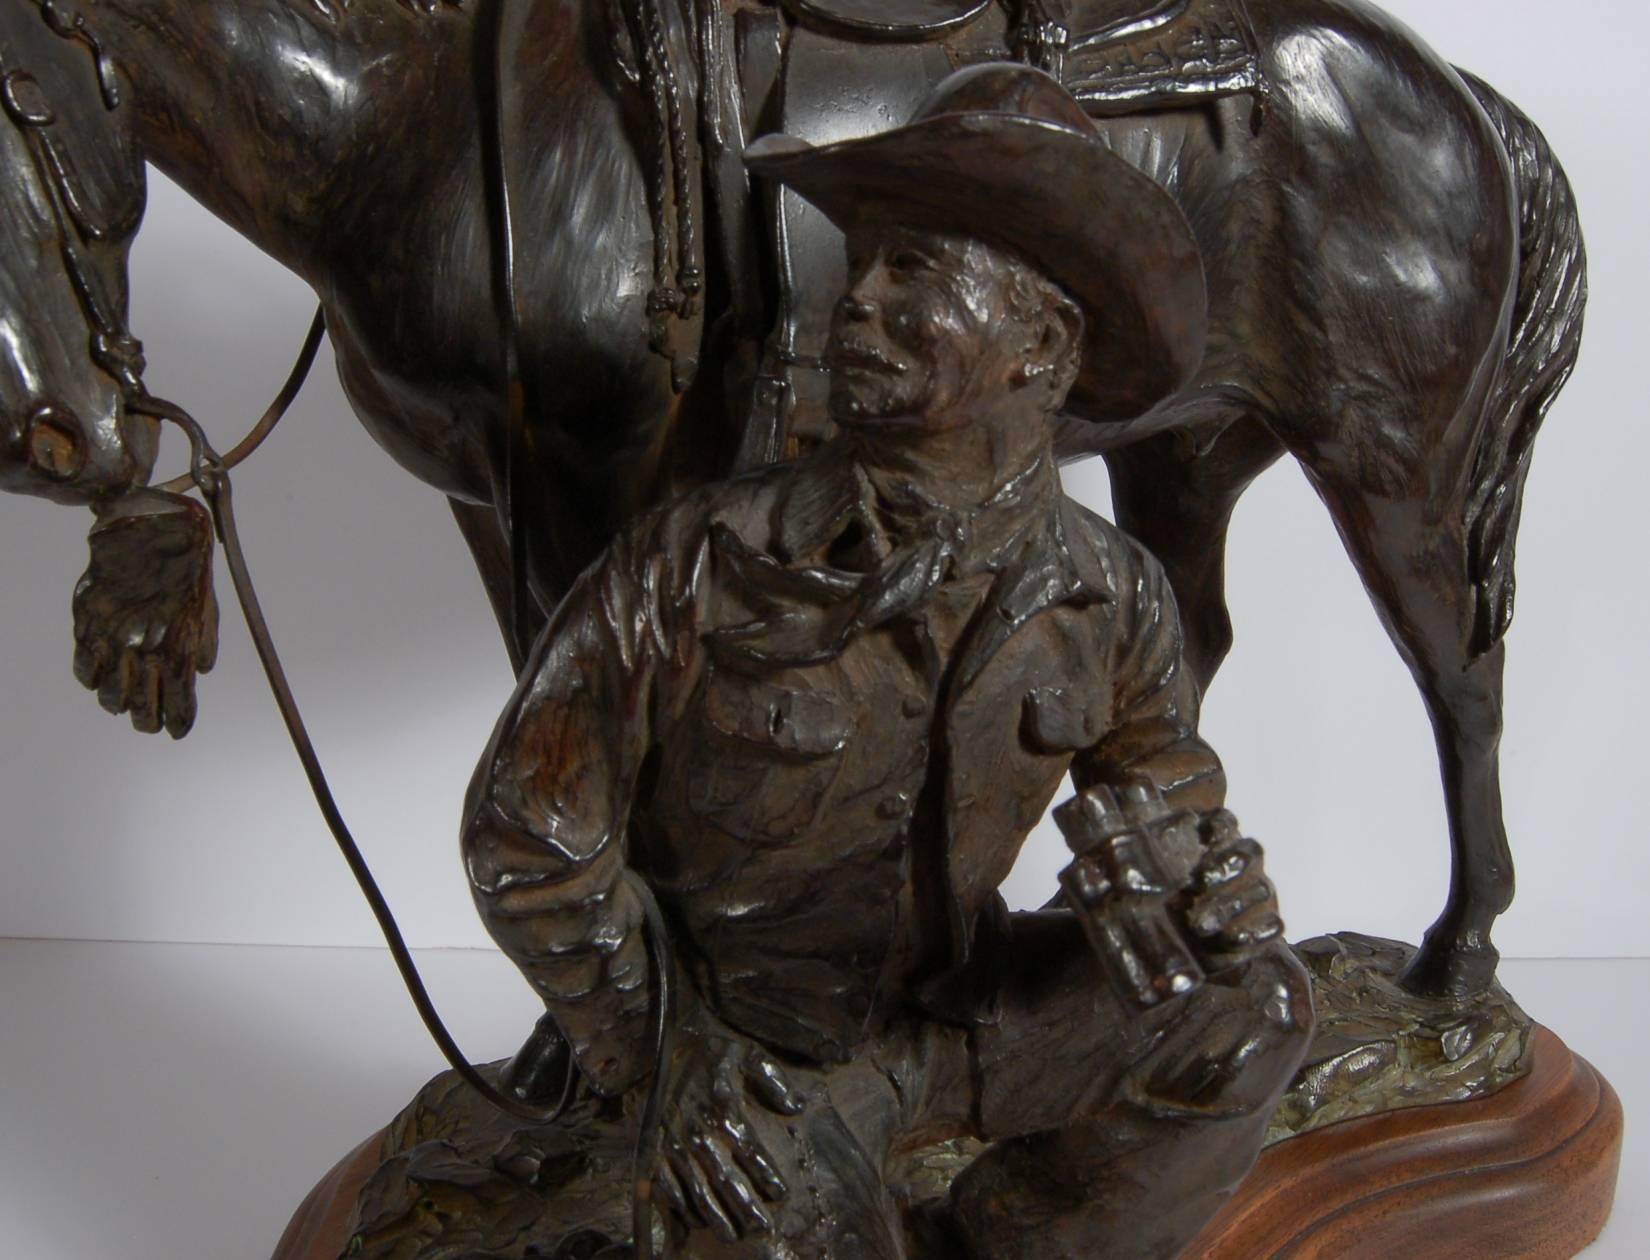 This artwork is a original bronze sculpture titled "The Pickpocket" 1993 by noted American artist Bill Nebeker, born 1942. It is signed , dated and numbered 4/25 in the bronze. The size including wood base is 11.75 x 13 x 9.5 inches. The